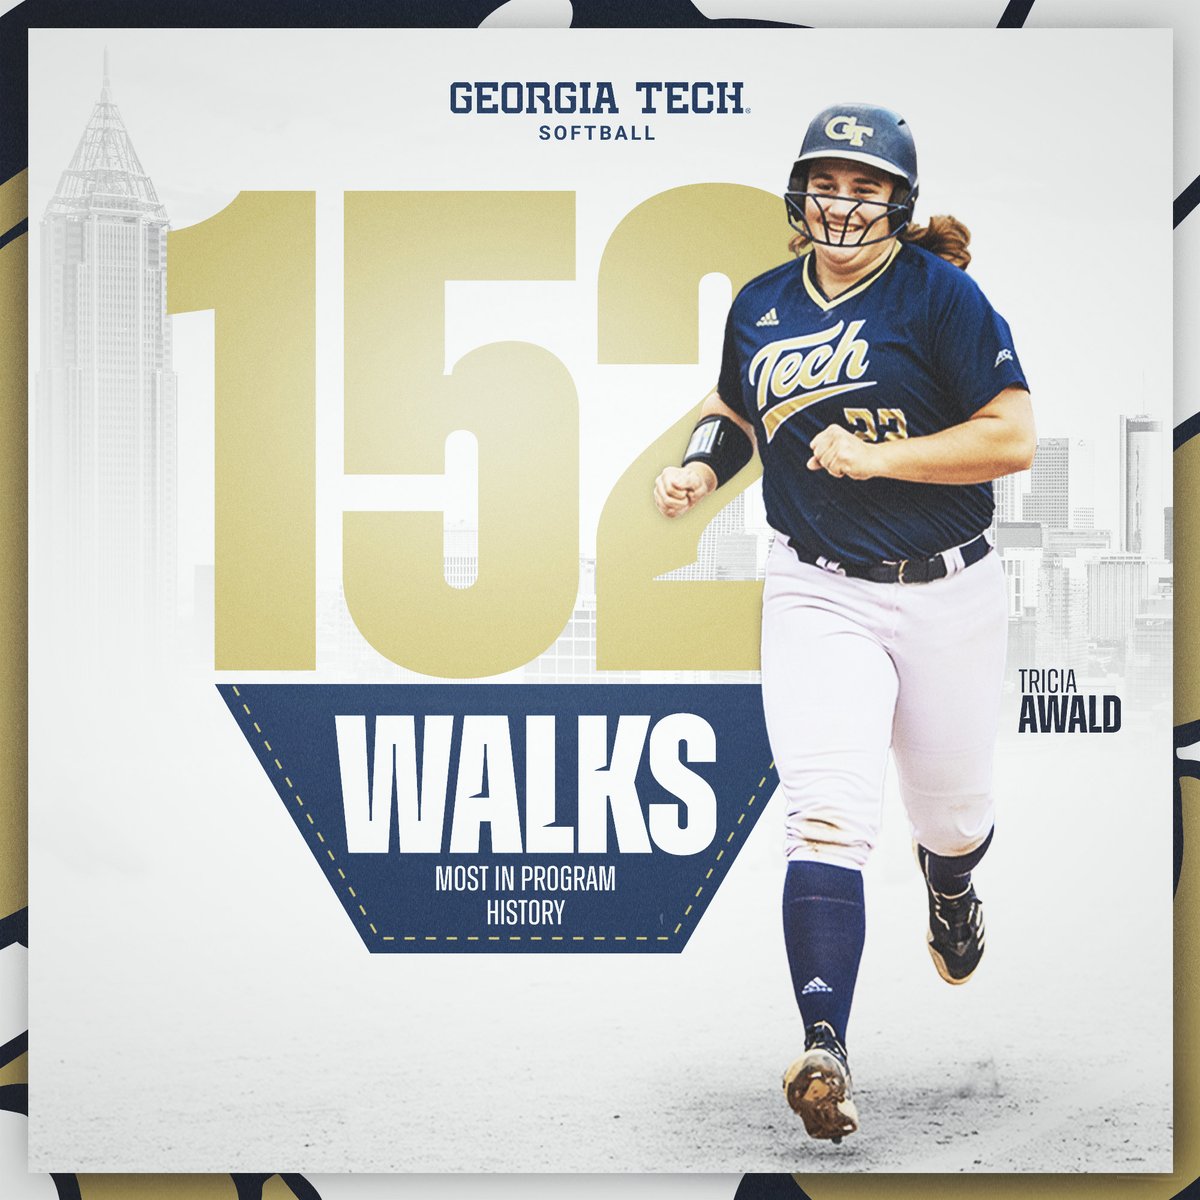 👑𝐅𝐄𝐀𝐑 𝐓𝐇𝐄 𝐐𝐔𝐄𝐄𝐍👑 @TriciaAwald22 has become our 𝘼𝙇𝙇-𝙏𝙄𝙈𝙀 𝙇𝙀𝘼𝘿𝙀𝙍 in career walks❕🚶‍♀️ Safe to say other pitchers don't want those problems when Trish steps to the dish 🙅‍♀️ #BeGold /// #404Institute